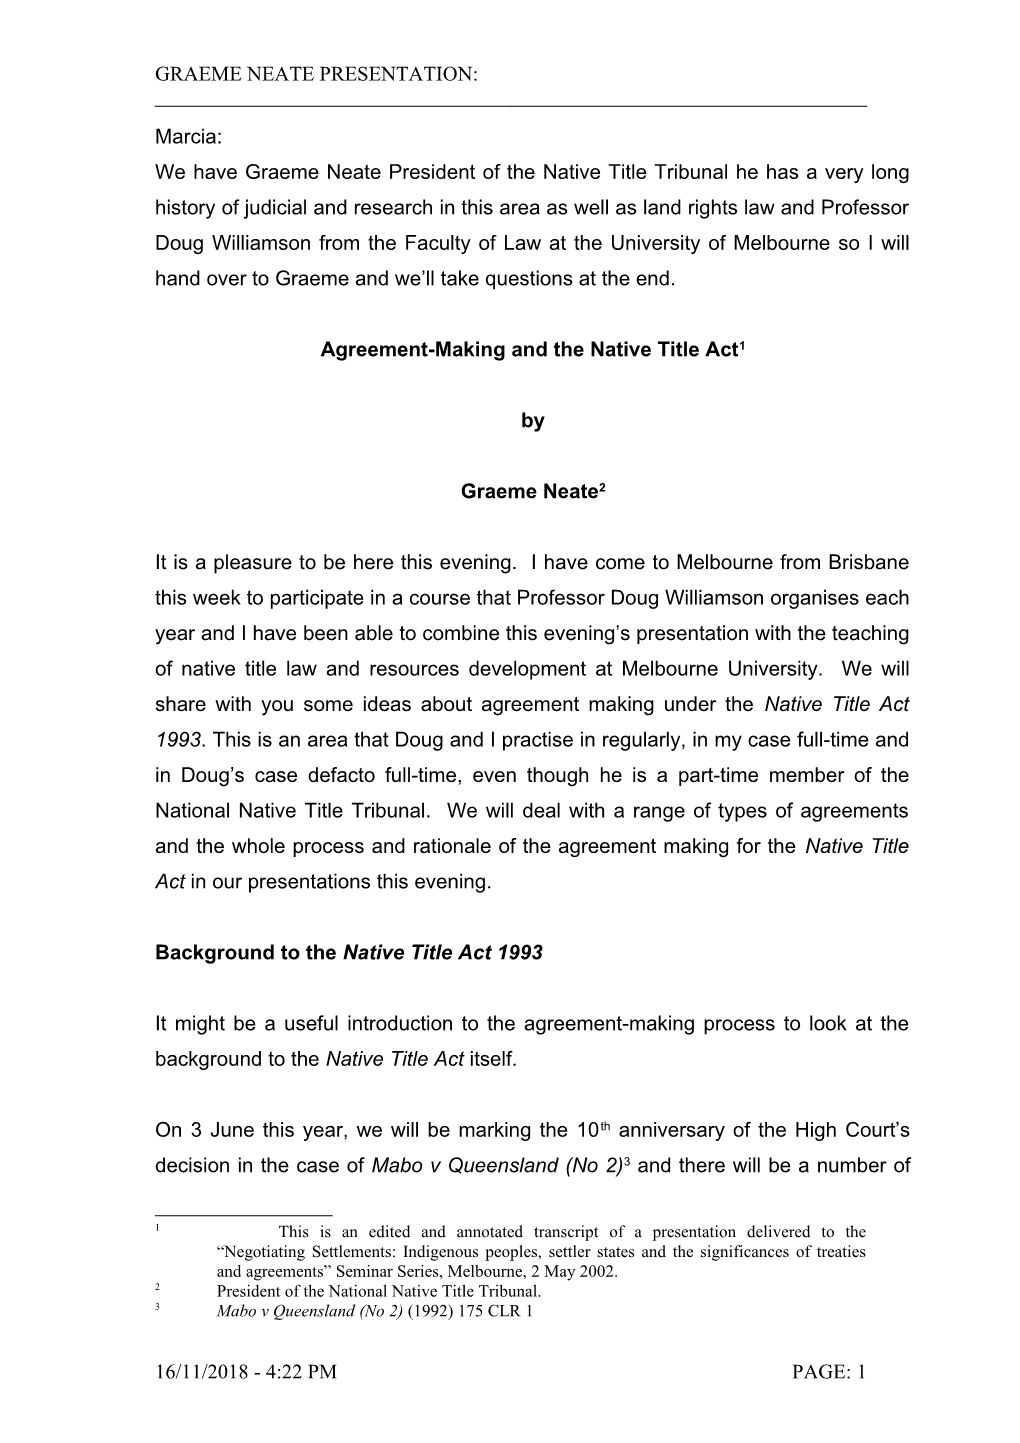 Agreement-Making and the Native Title Act 1